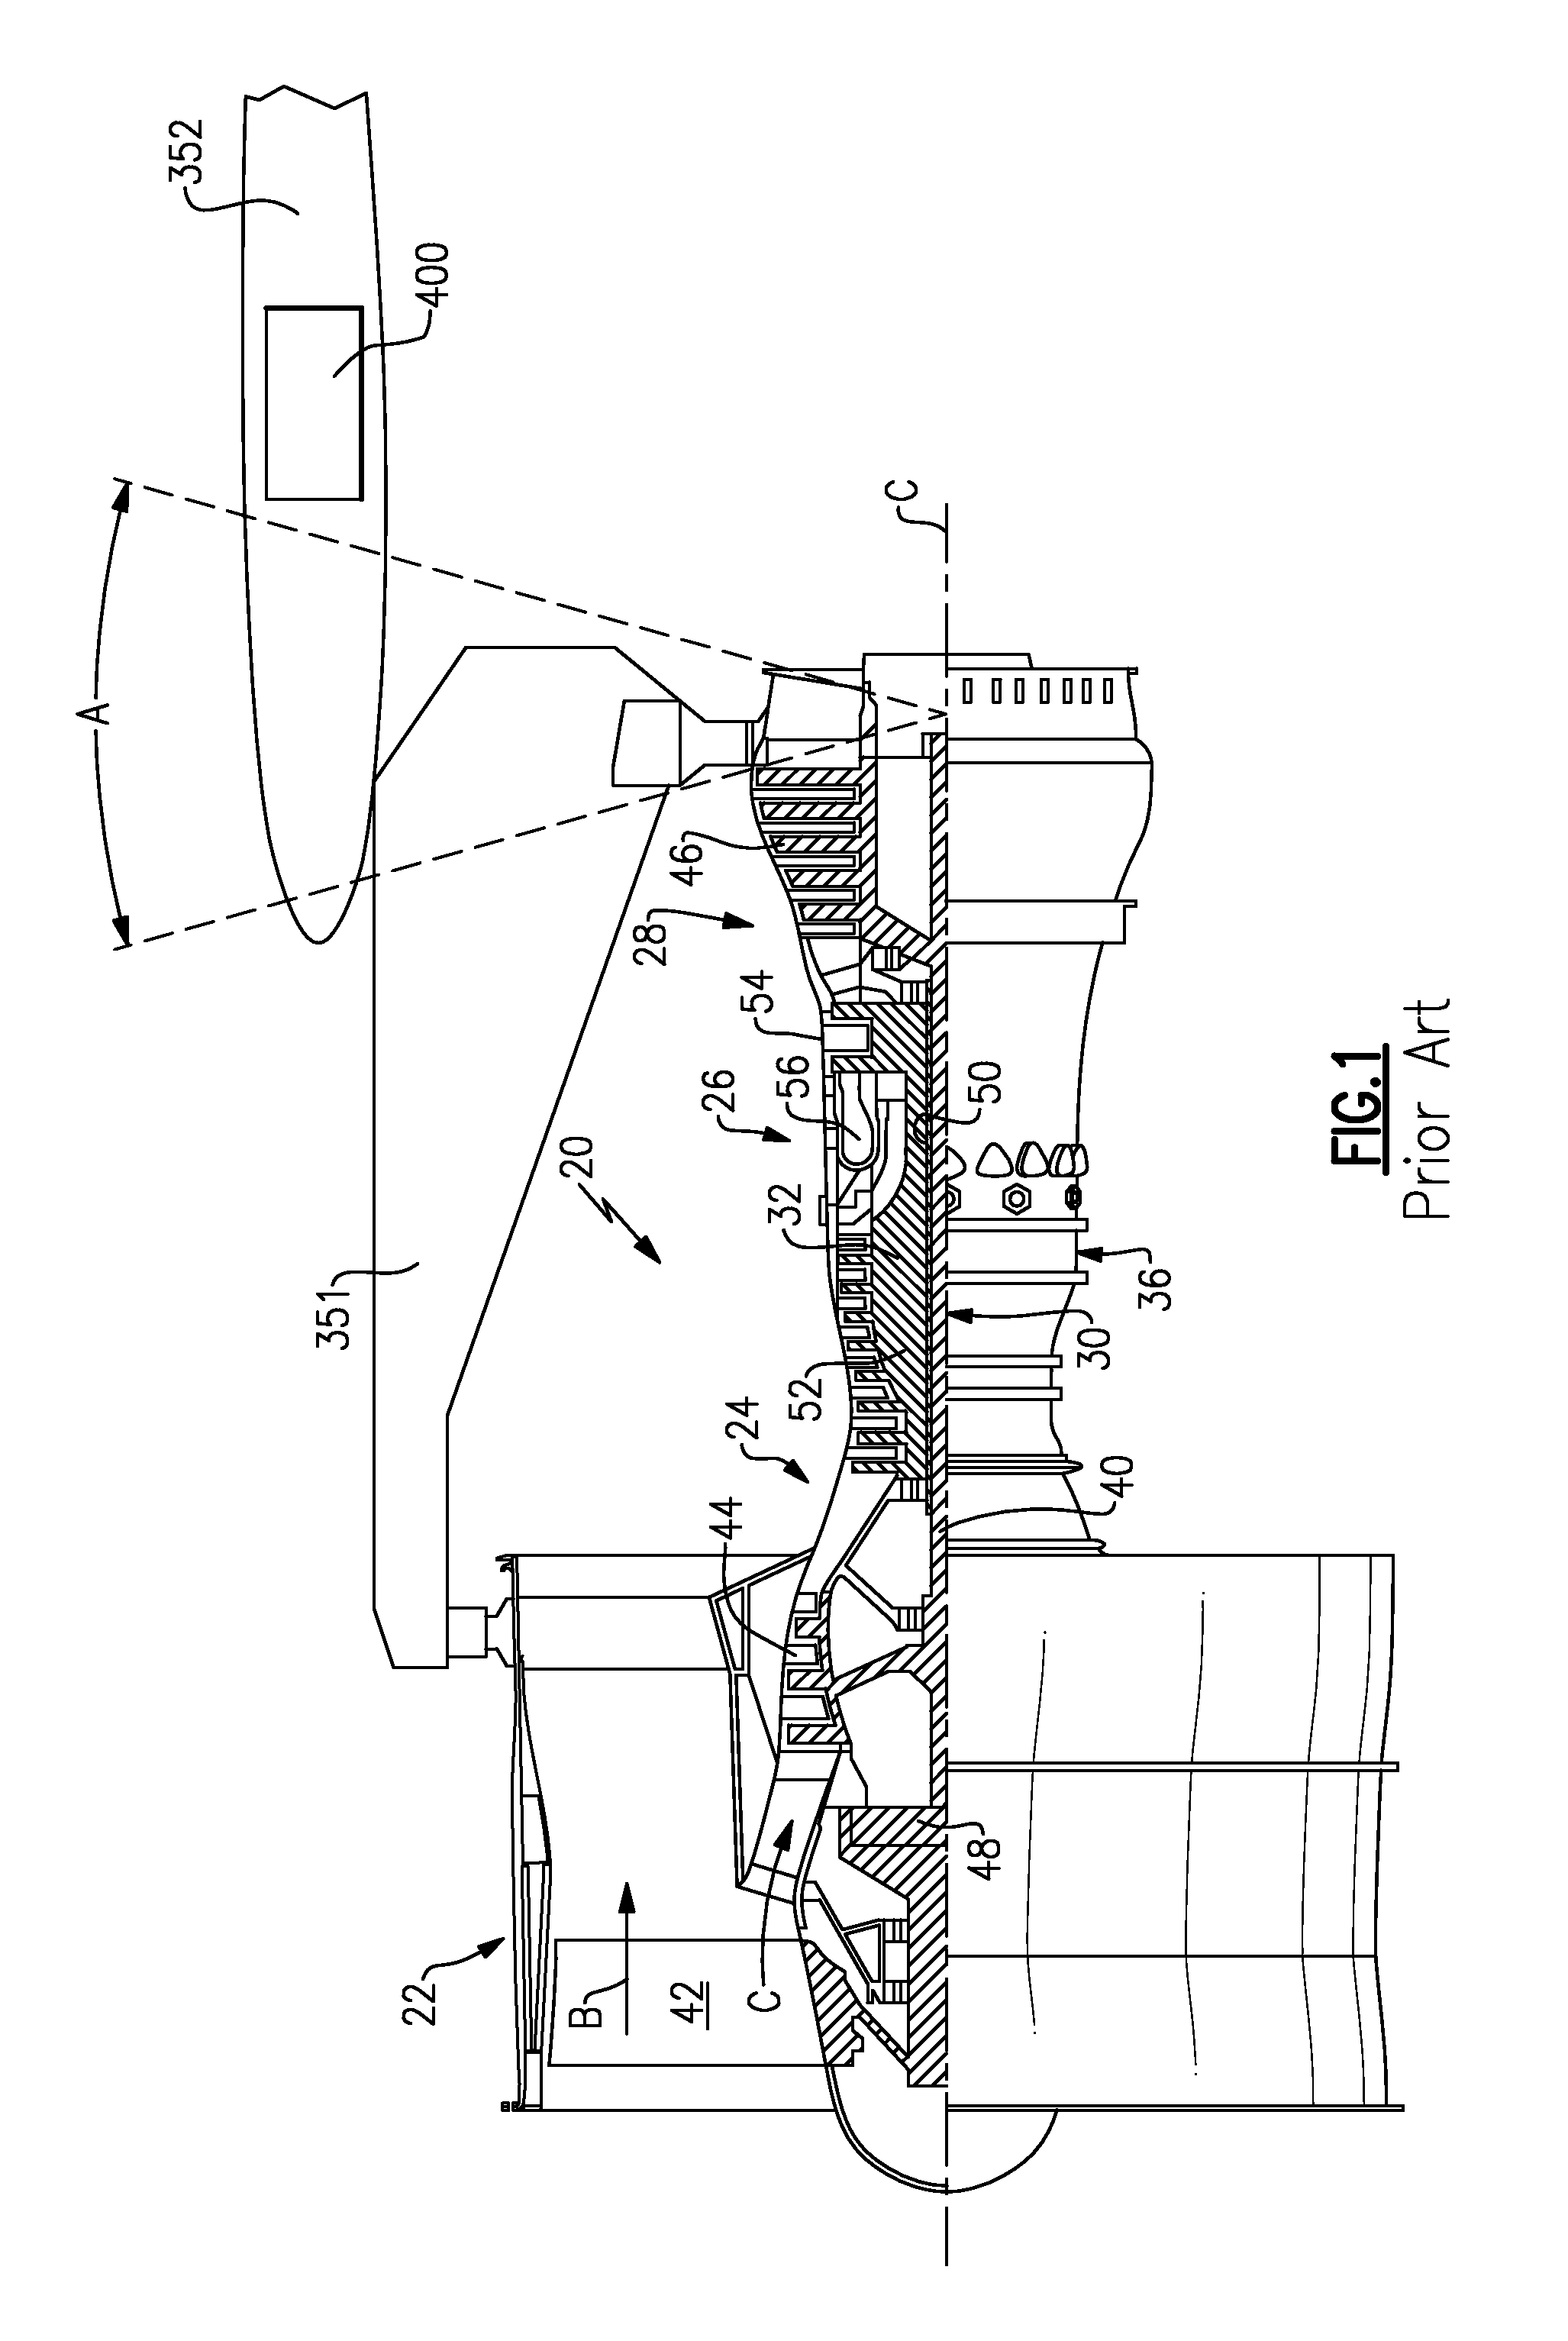 Gas turbine engine with modular cores and propulsion unit